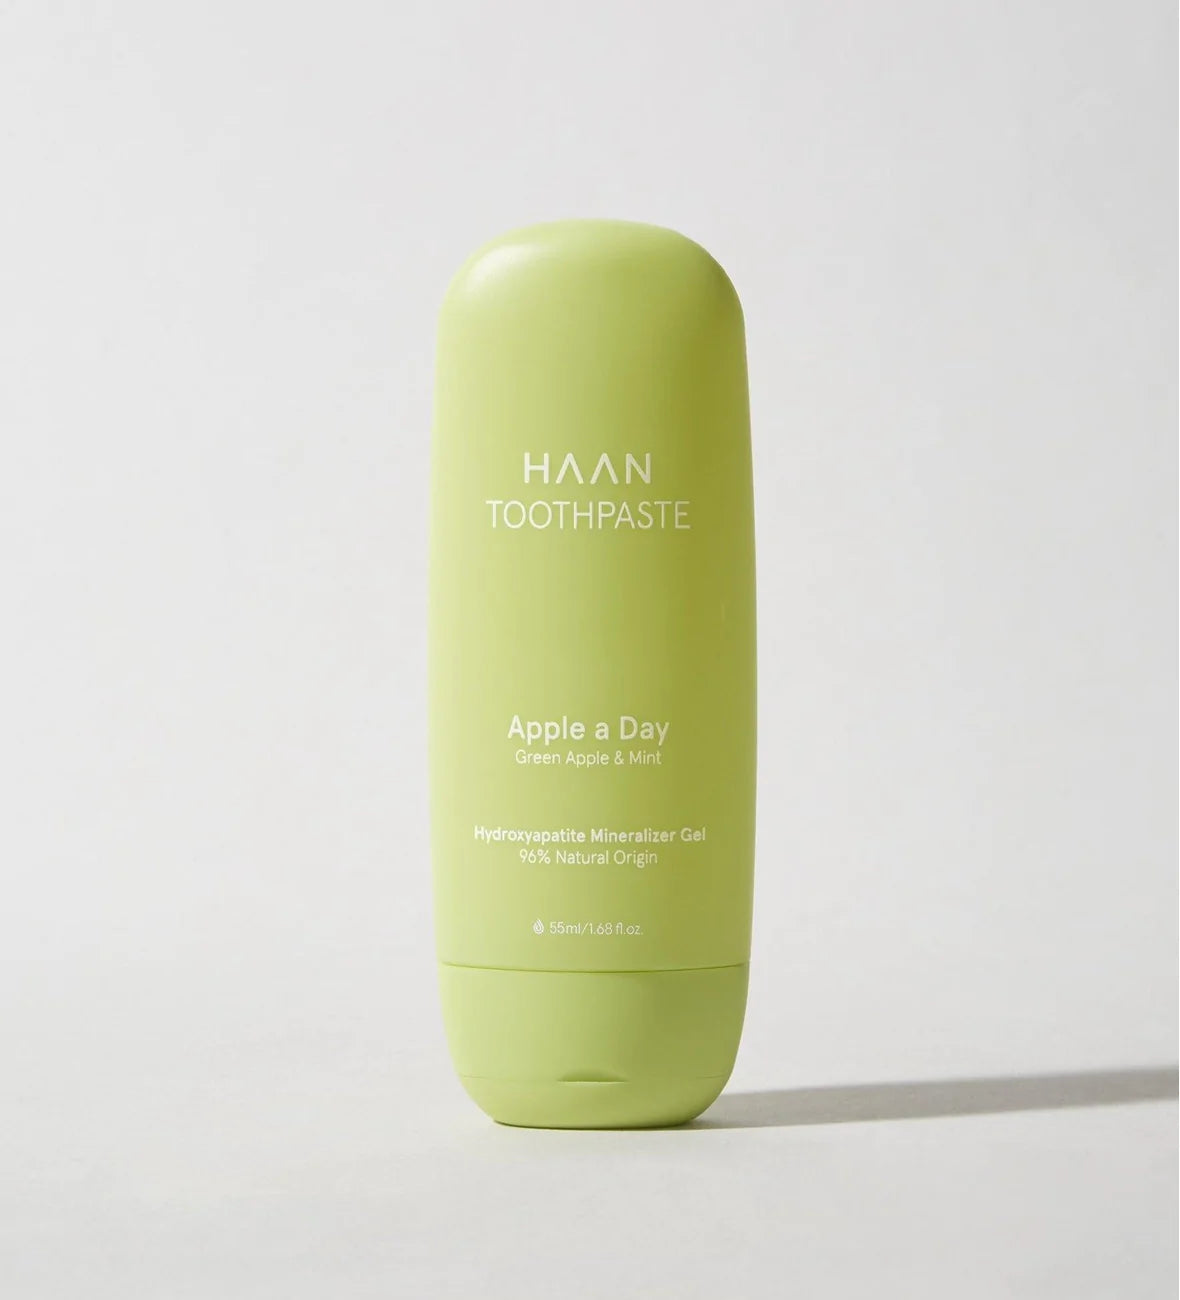 HAAN Toothpaste — Apple a Day 55 ml